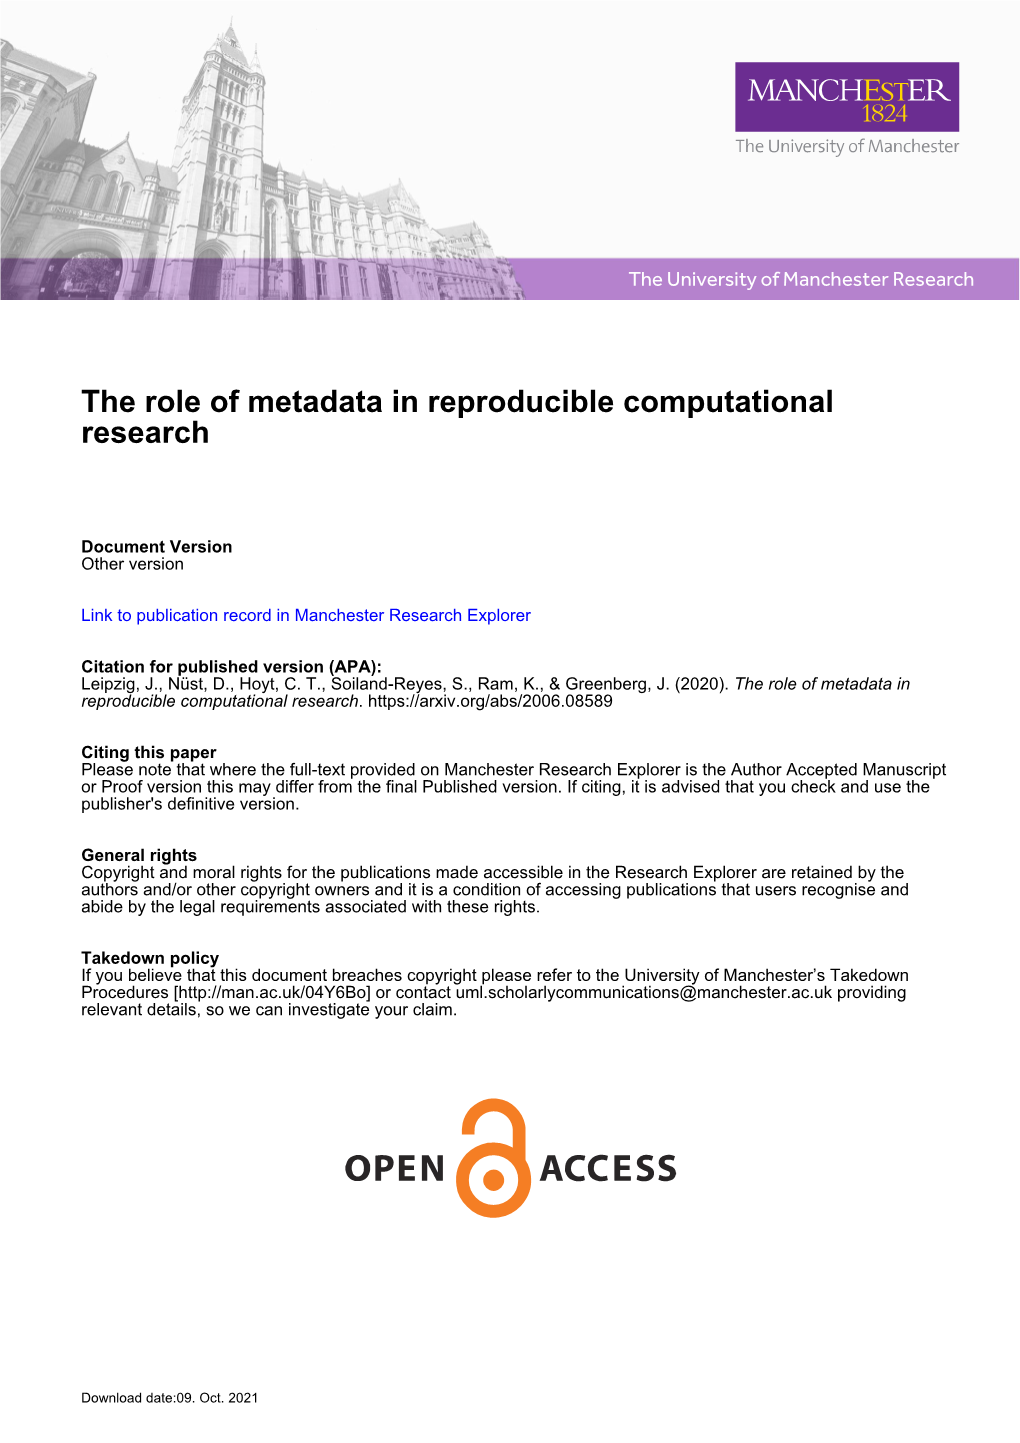 The Role of Metadata in Reproducible Computational Research